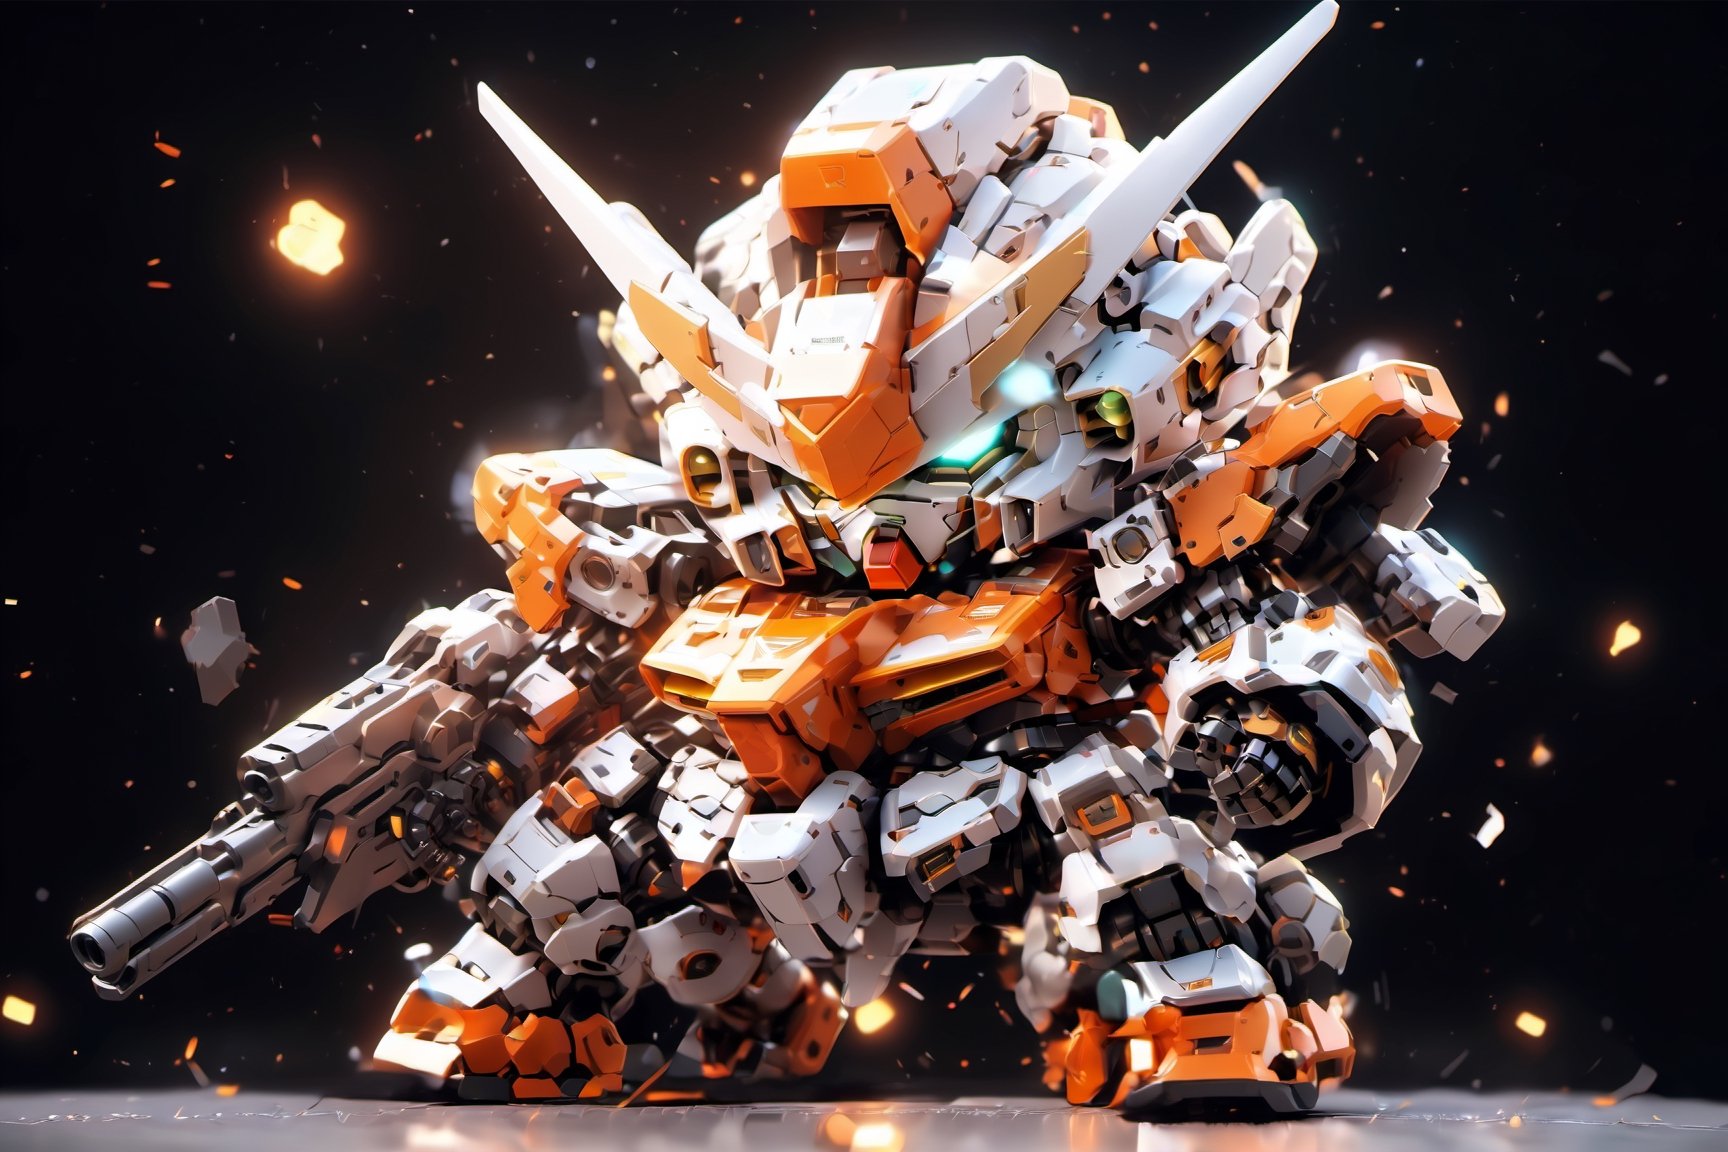 Best quality, masterpiece, high level of detail, ultra hires, masterpiece,  16k wallpaper,  absurdres, concept art,  high level of detail,  (HDR:1.4), blush_stickers,
BREAK

BJ_Cute_Mech, 1 bipedal mech,  solo, chibi,  extremely beautiful mech, perfect chibi full body,  mech in distance,  mechanical face,  mech face in detail,  huge mechanical head in detail,  hard surface face,  two huge jade eyes like mecanical camera lends, perfect chibi full body, extremely super small torso,  weapon,  (holding_shield in mech's left hand:1.5) ,  (gun:1.5),  helmet, holding_ mechanical weapon in mech's right hand, chibi android,  joints,  robot_joints,  orange rivet on joints,  hard surface,  heavy armored head and body, heavy armored arms and legs,
BREAK

//Background
(steampunk field  background:1.5),  depths of deep field, broken machines, many gears, many machines, 

//Effect
cinematic lighting, light effects, blooming light effects,paper collage, layered composition,structured patterns,(mixed media aprroach,  creative doodling, artistic expression, Zentangle:1.4), ,photo r3al,chibi,ROBOT,chibi gundam